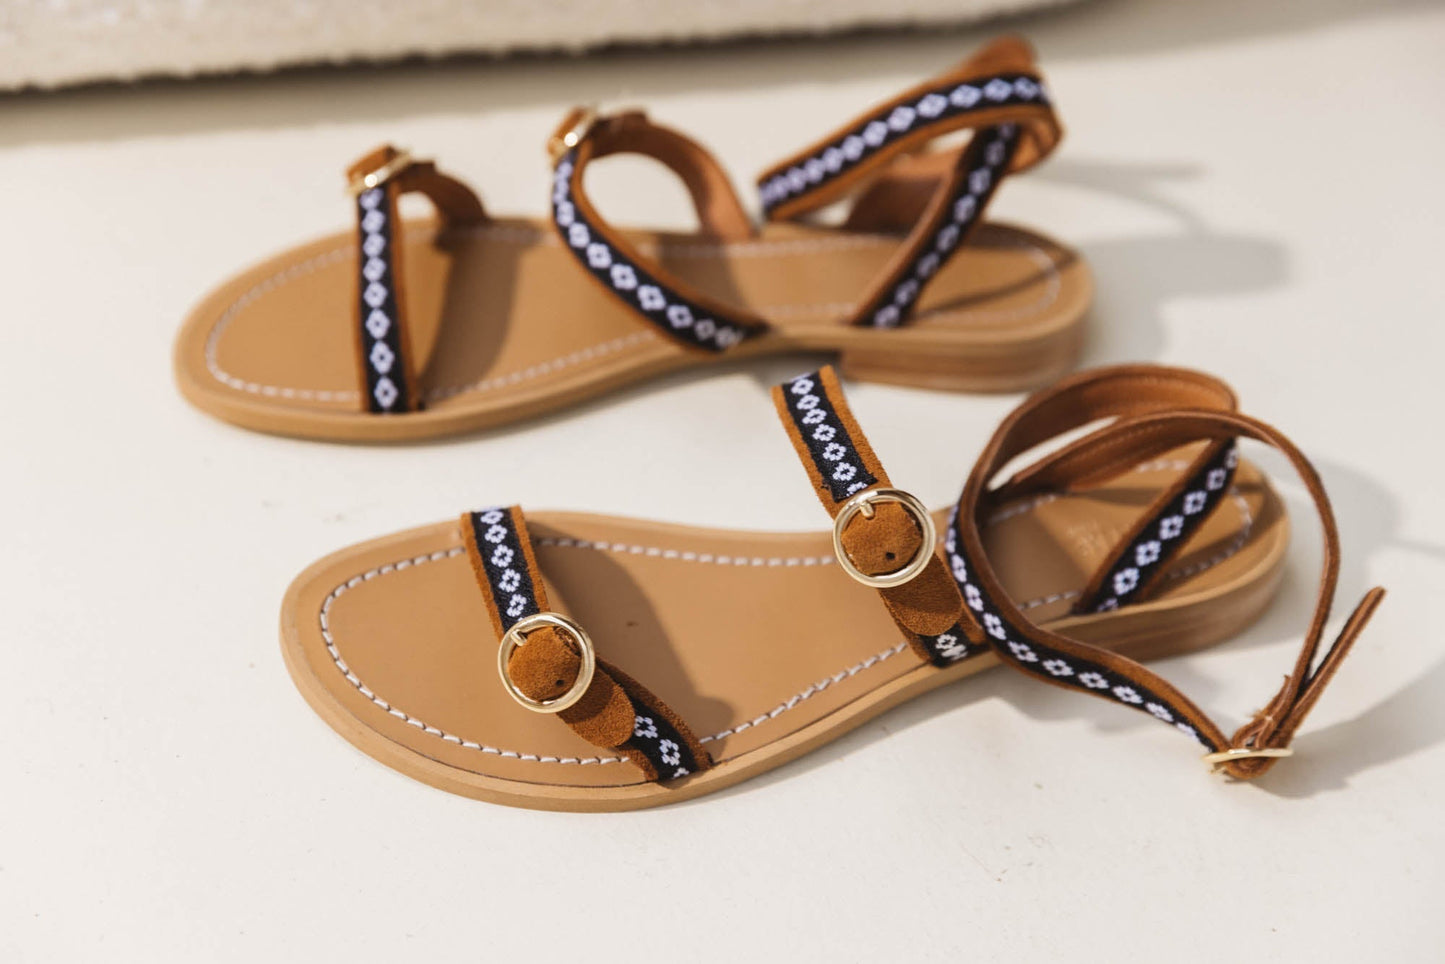 Elia camel sandals with embroidered braid